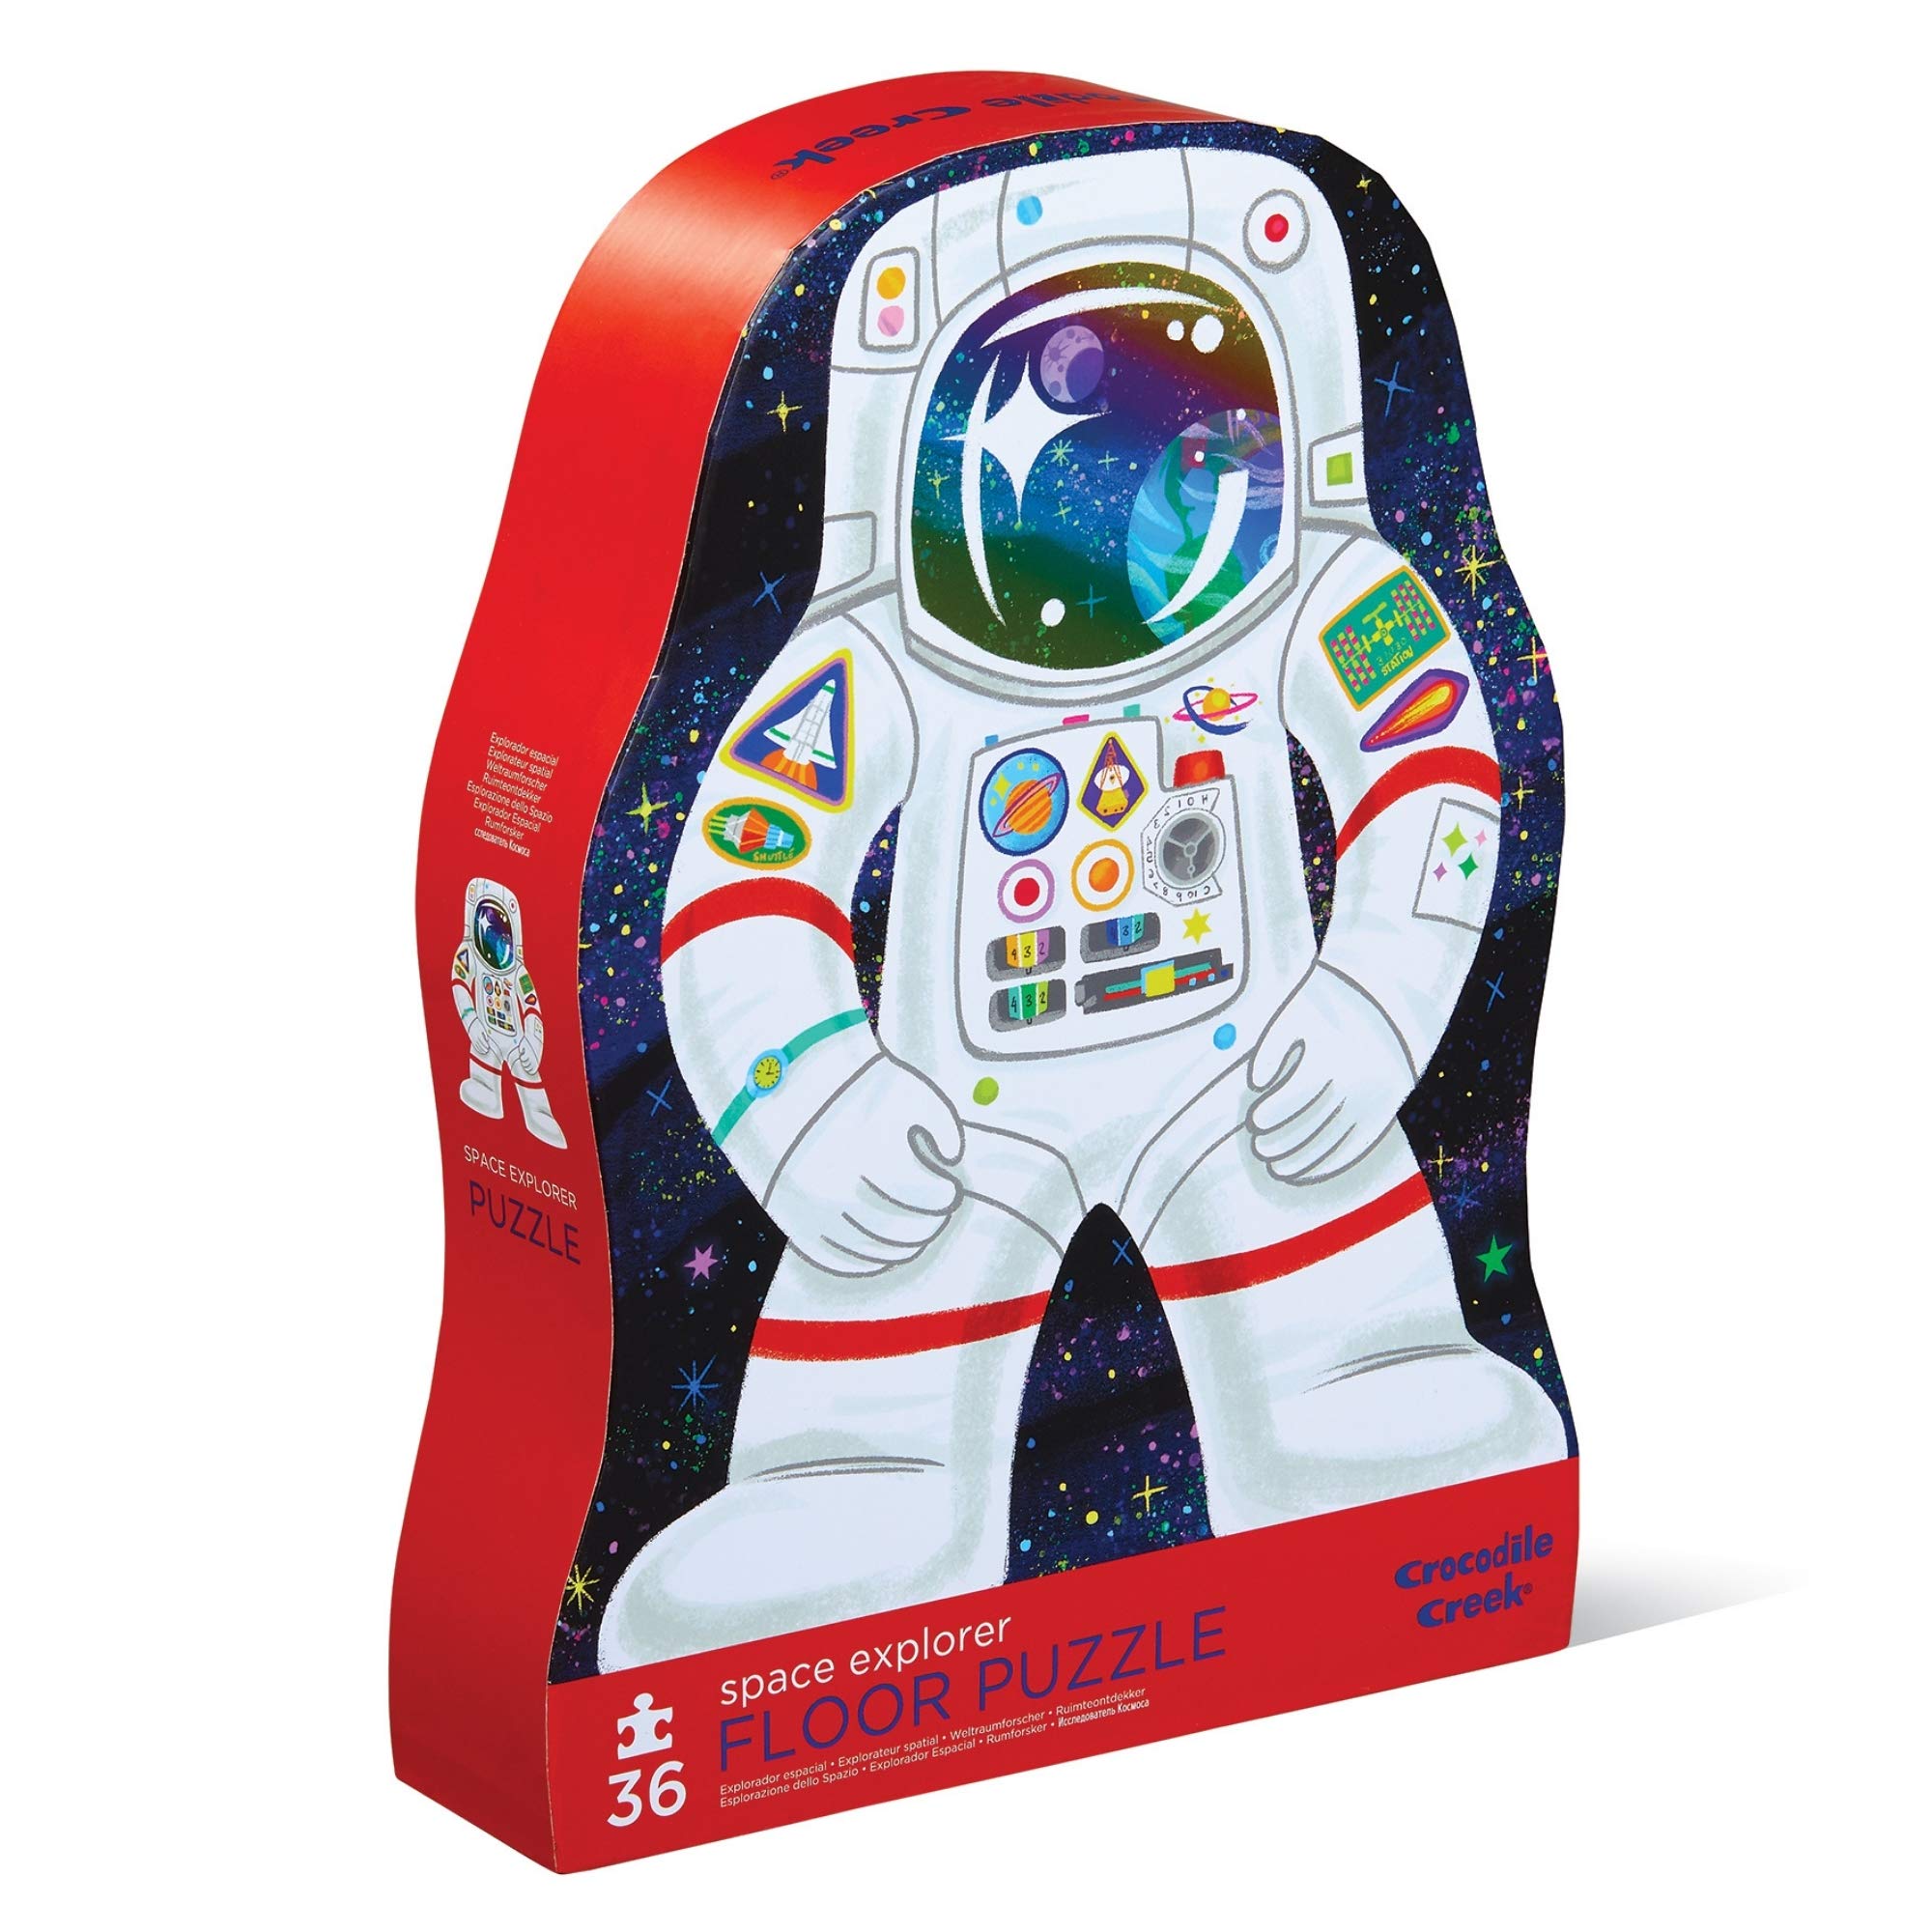 Crocodile Creek - Space Explorer - 36 Piece Jigsaw Floor Puzzle with Heavy-Duty Shaped Box for Storage, Large 20